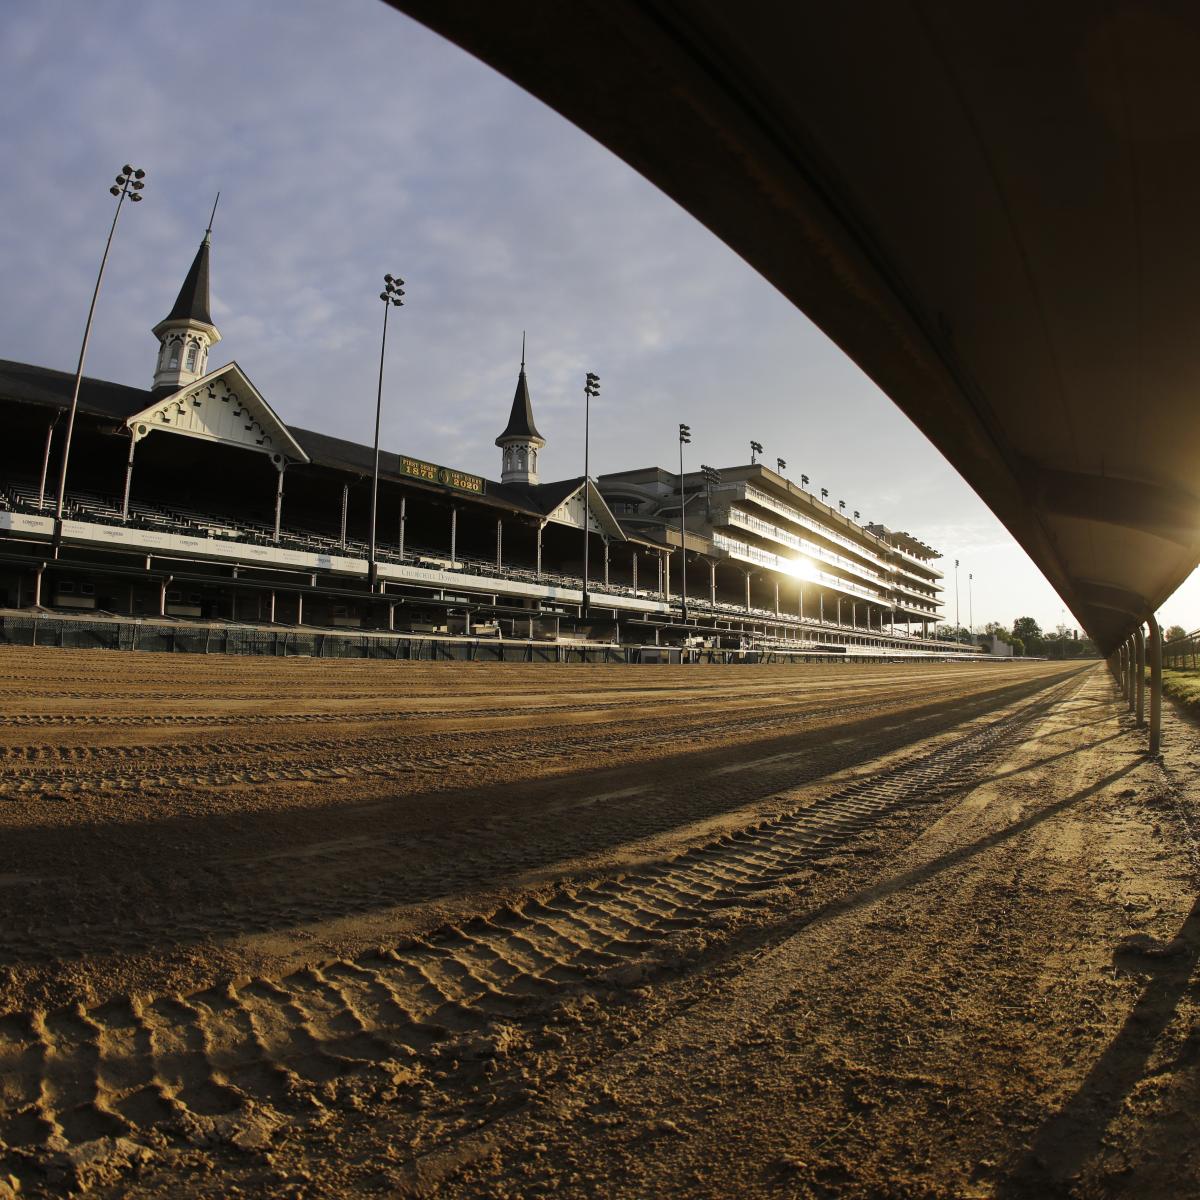 Kentucky Derby 2020 Post Time: Start Time, Schedule and More for 146th Race | Bleacher Report